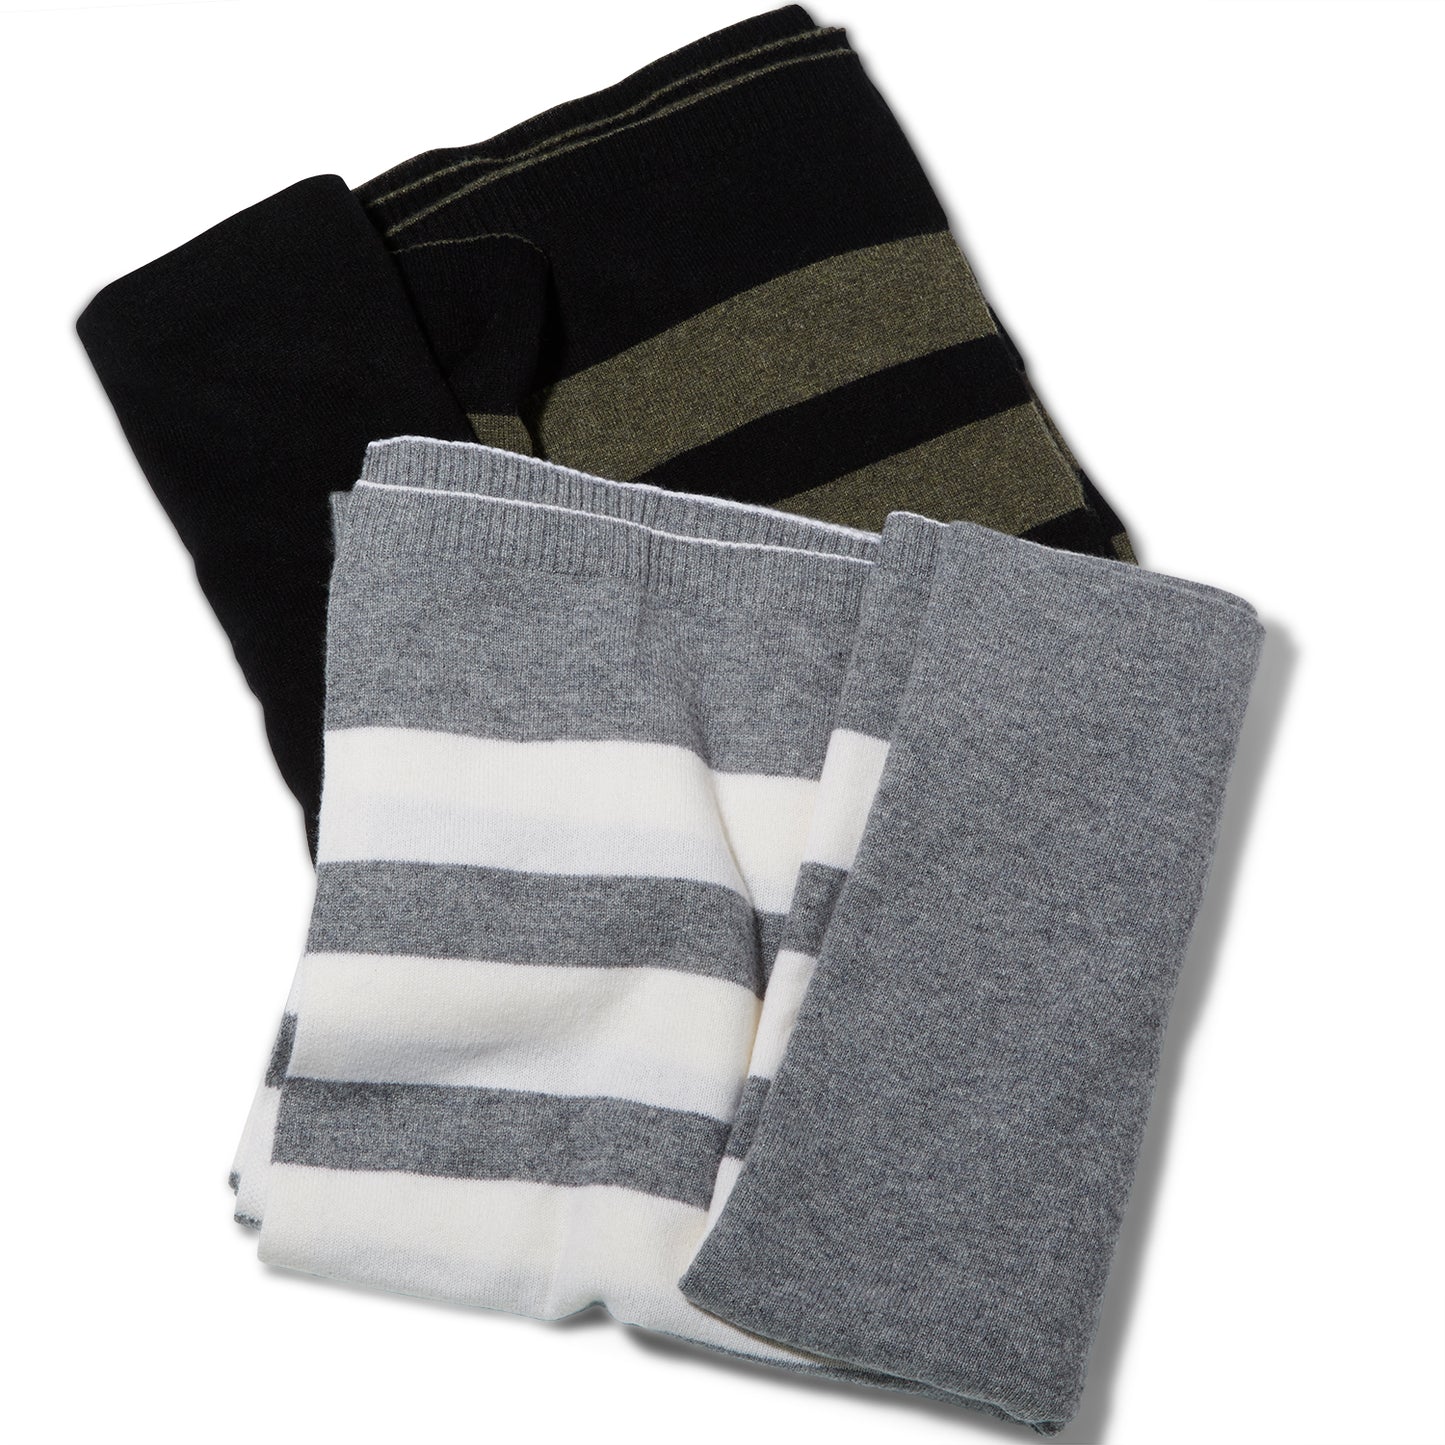 Two Reed Clarke Cashmere Travel blankets. A folded grey blanket with wide white stripes laying partially on top of a black blanket with wide olive green stripes.